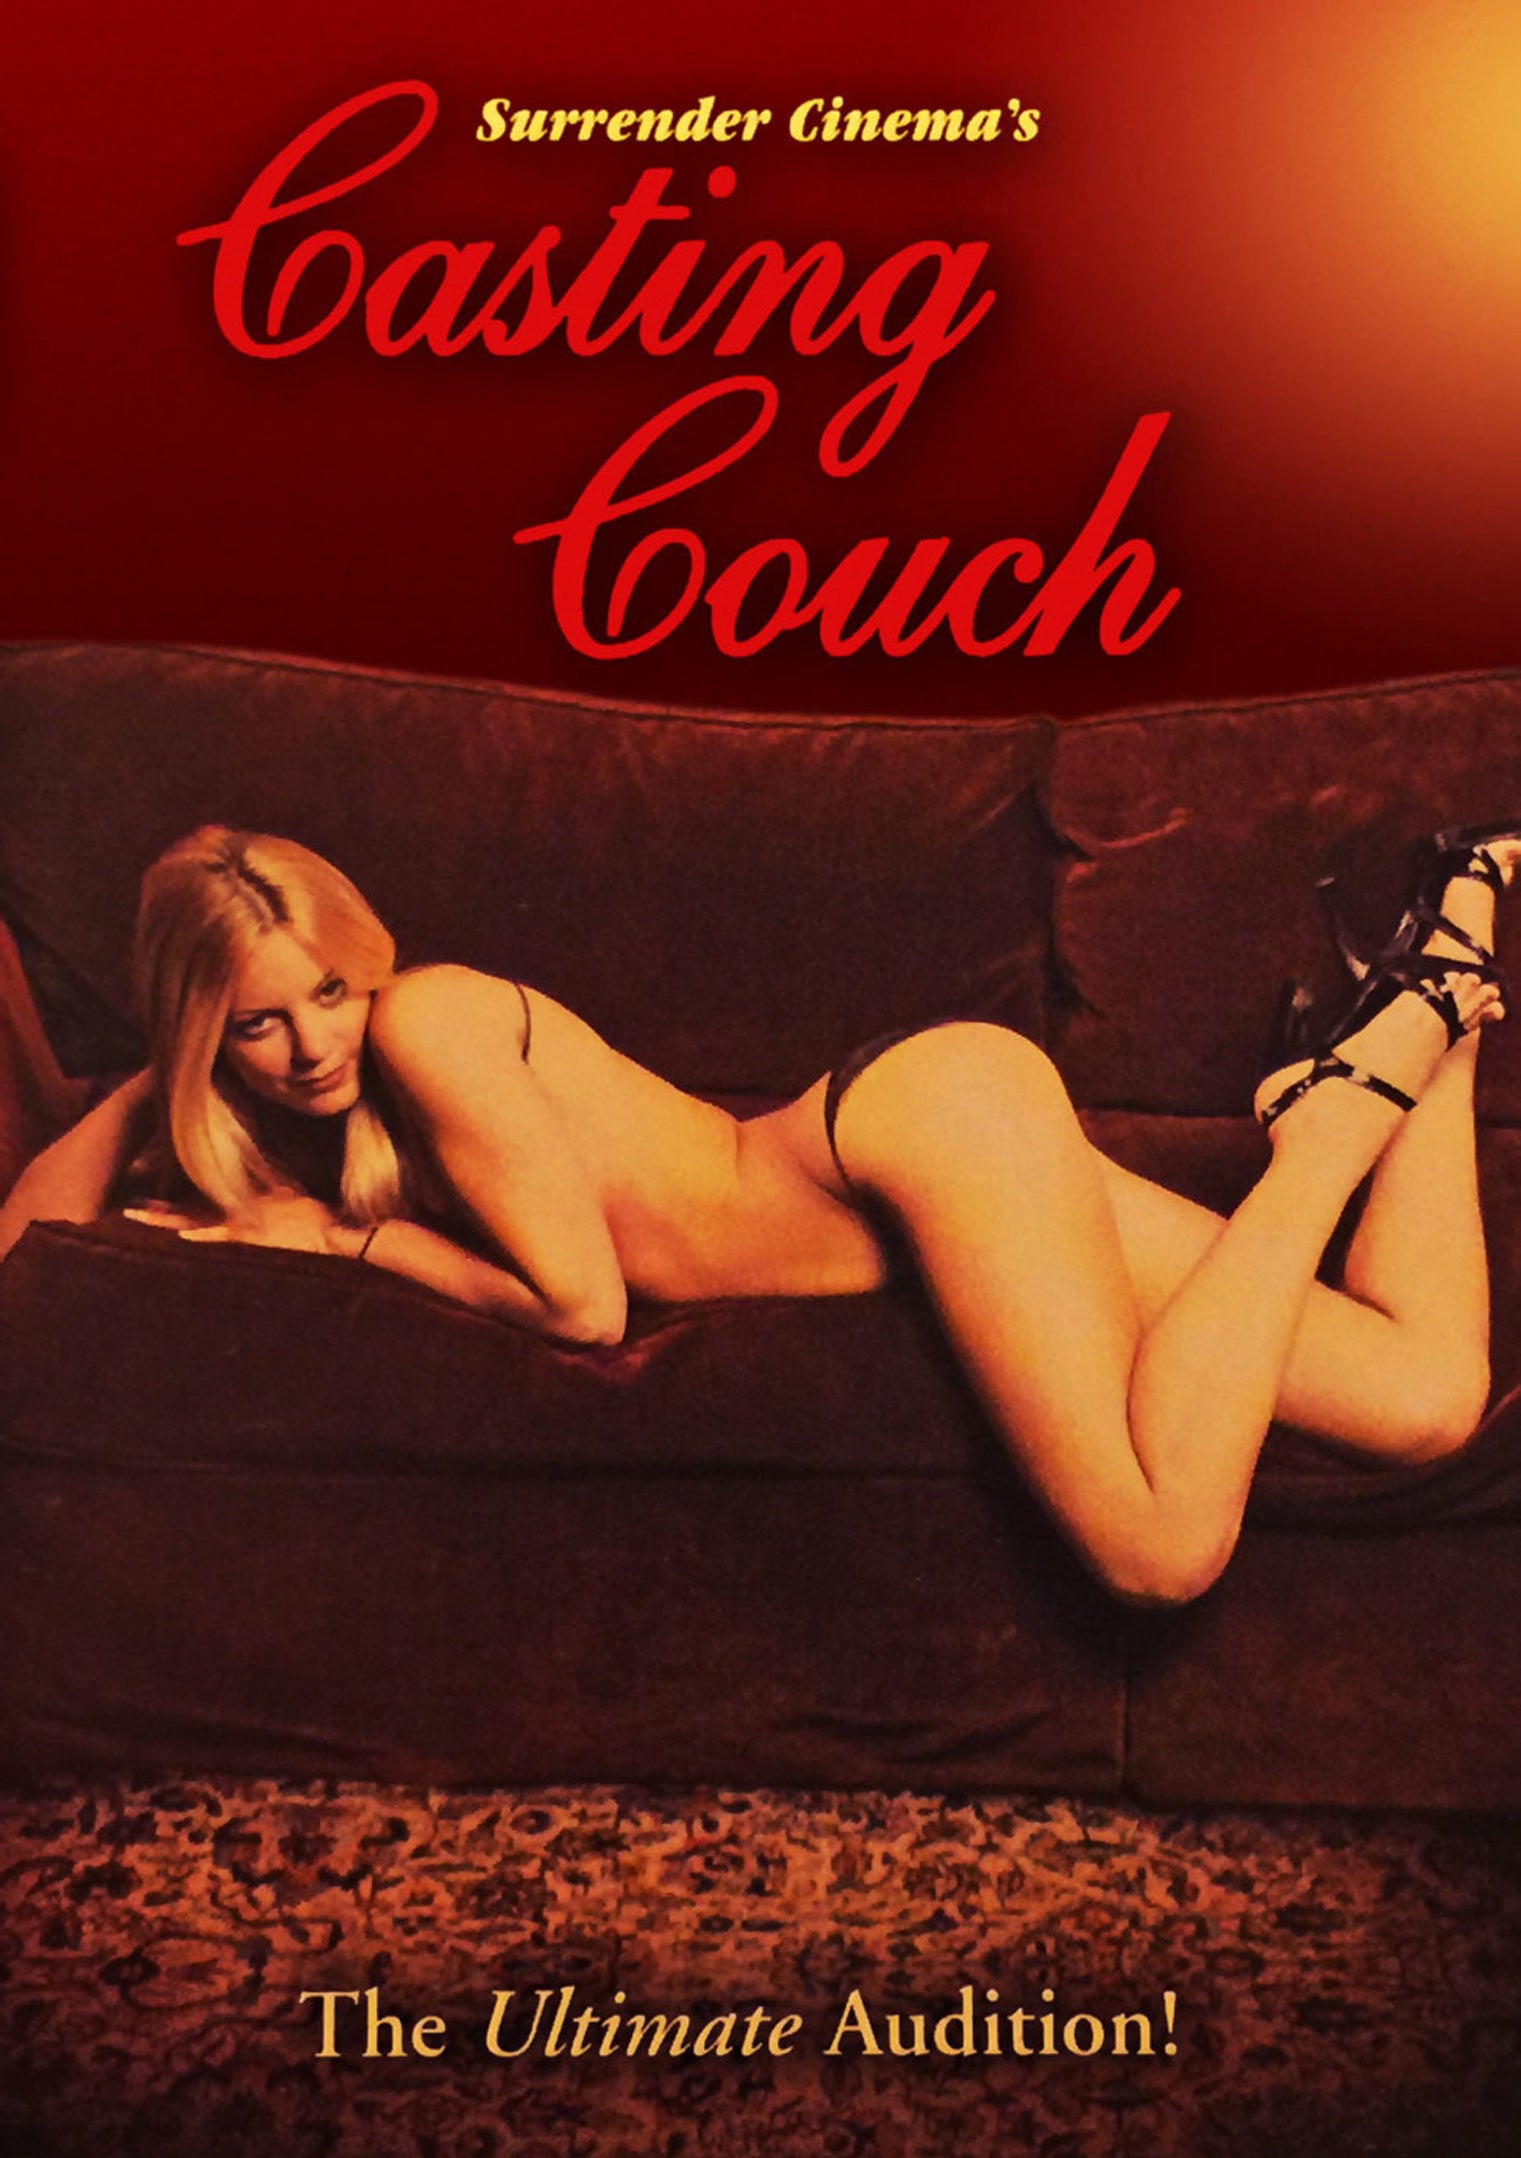 CASTING COUCH DVD